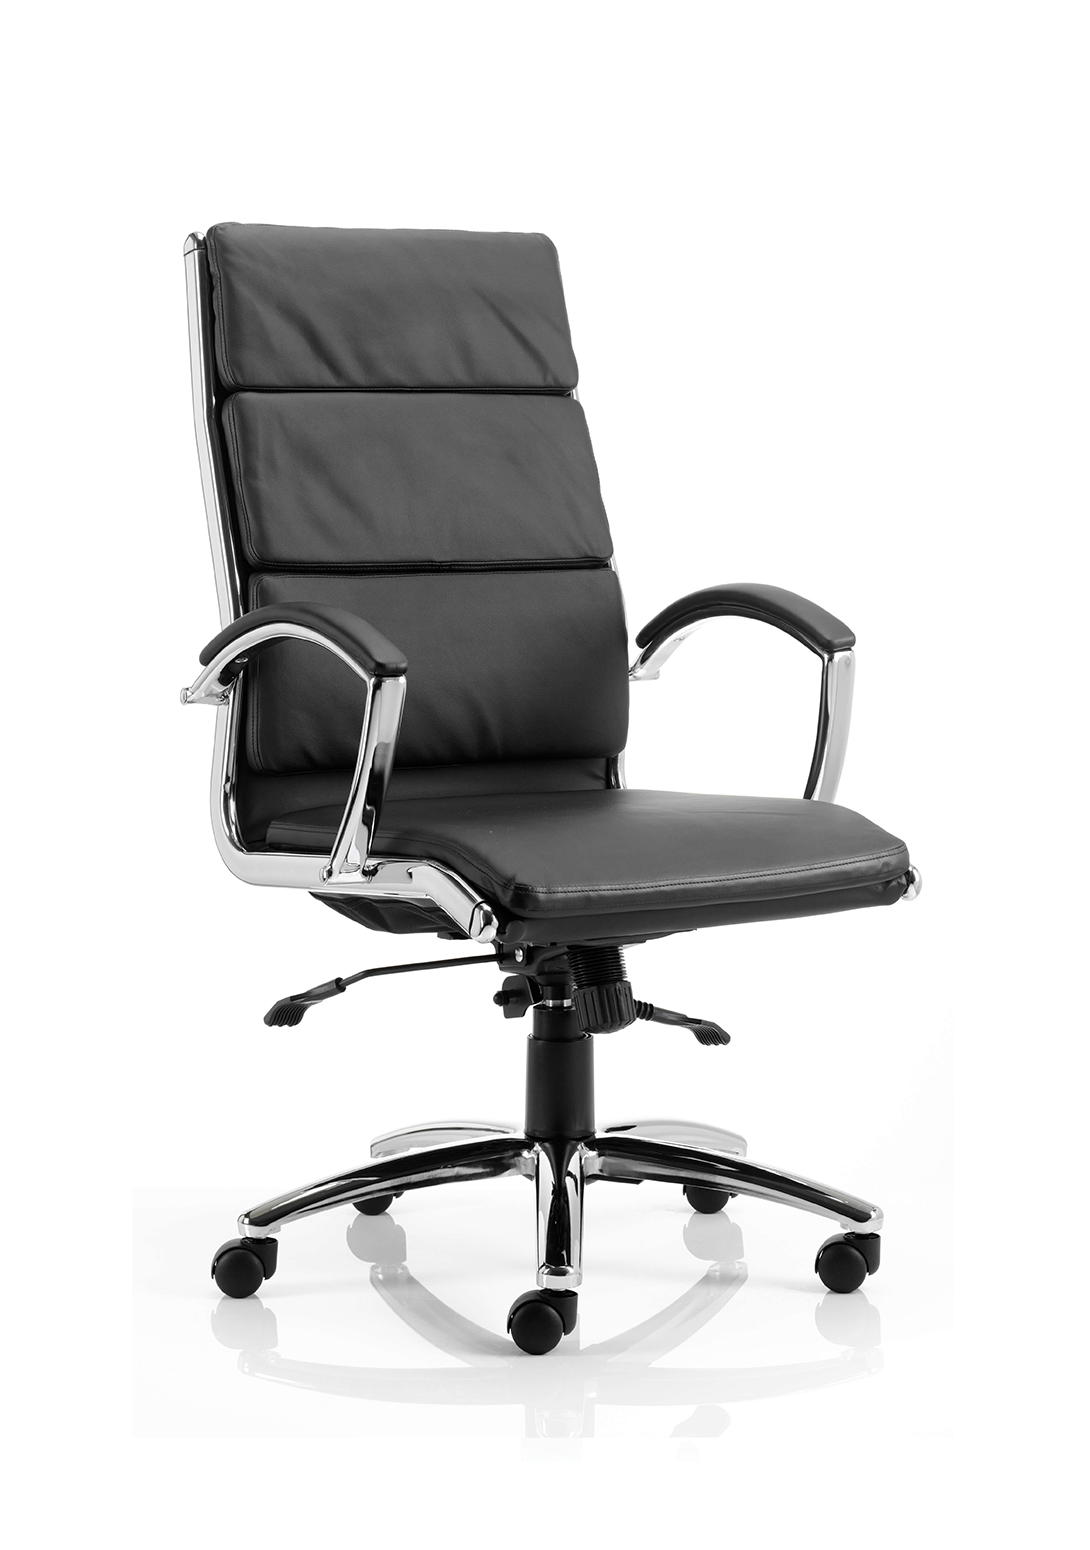 Classic Executive Chair High Back Tan With Arms 